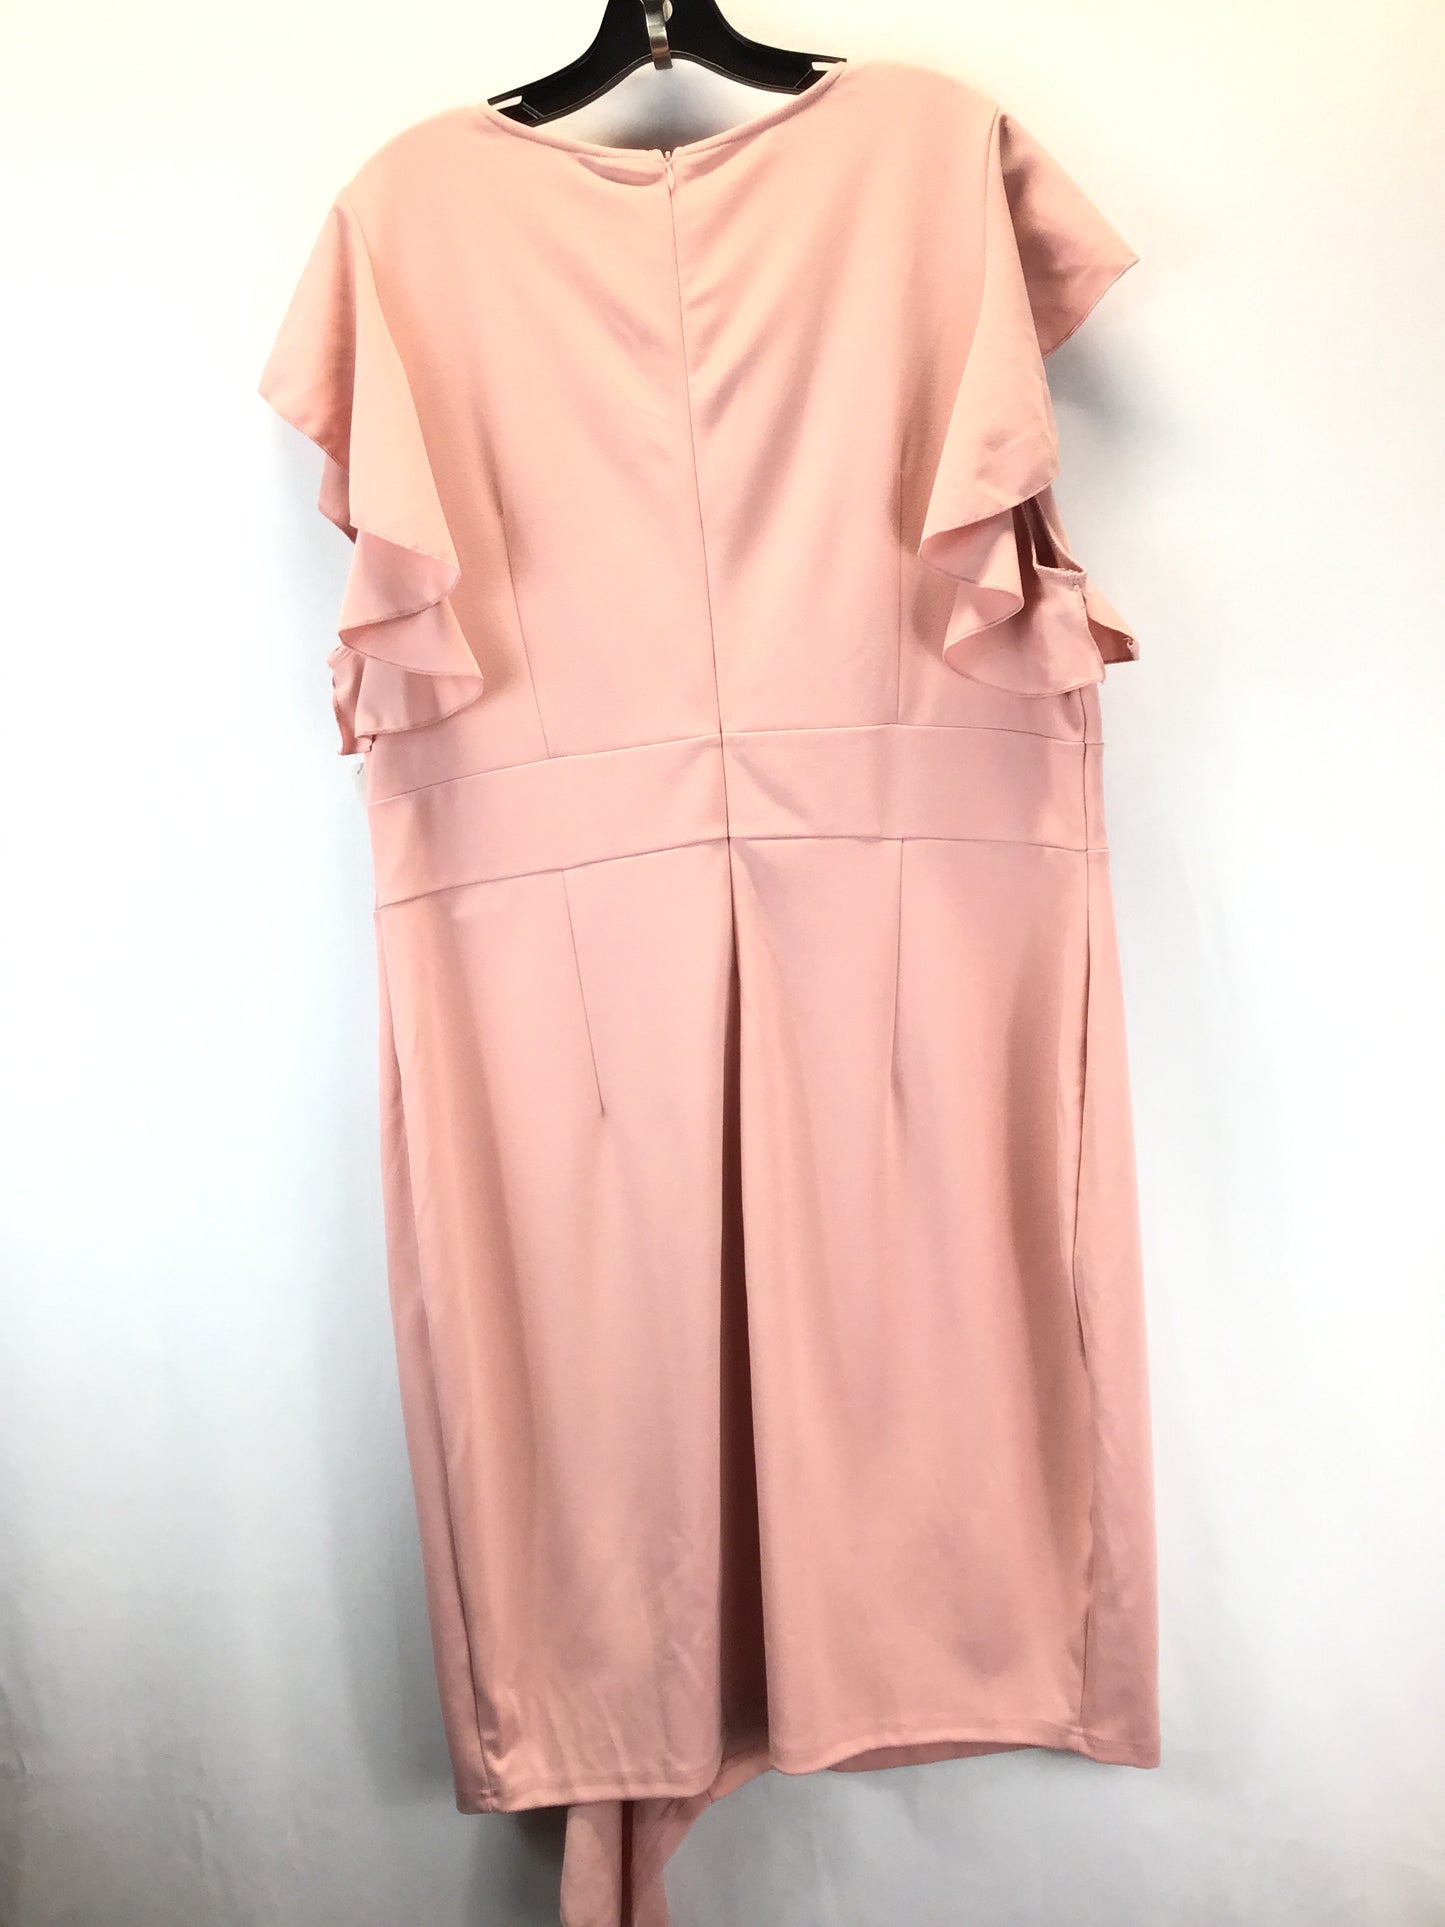 Dress Casual Midi By Clothes Mentor  Size: 4x